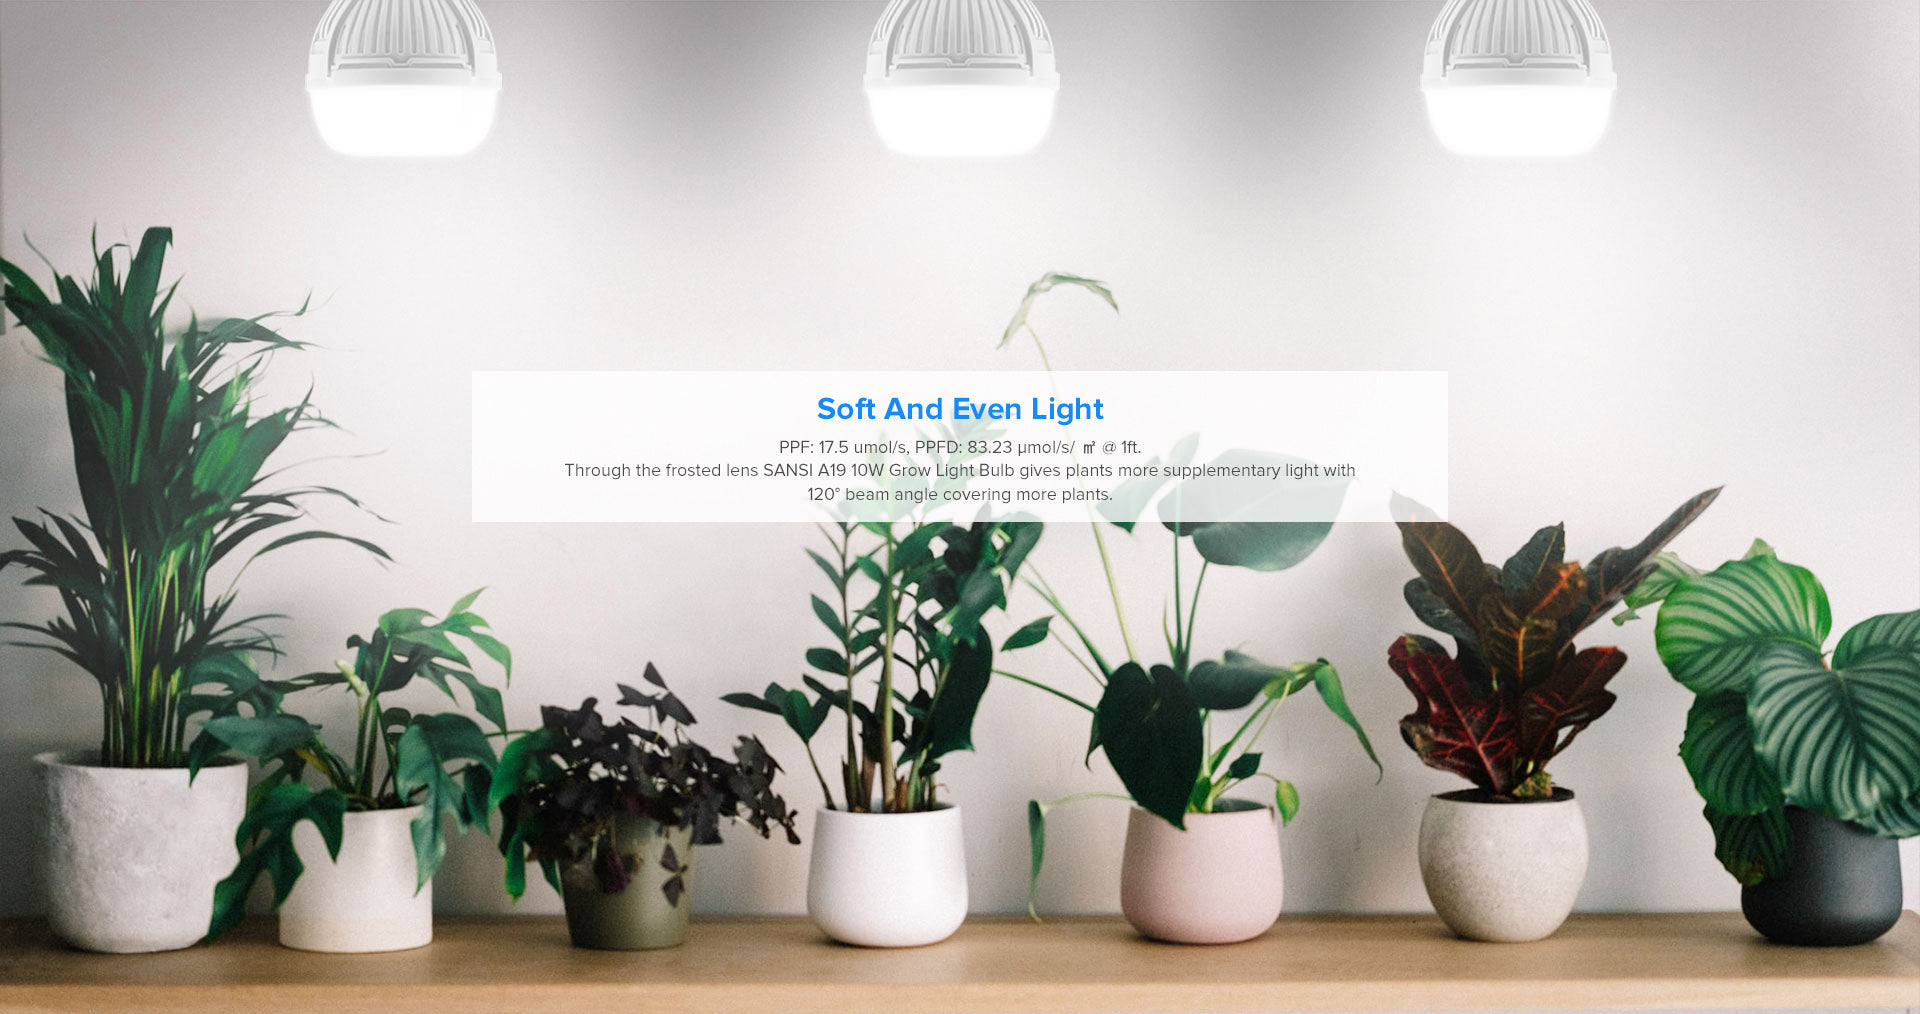 SANSI A19 has white and soft light. Through the frosted lens, A19 10W led grow light bulb gives plants more supplementary light with 120° beam angle covering more plants